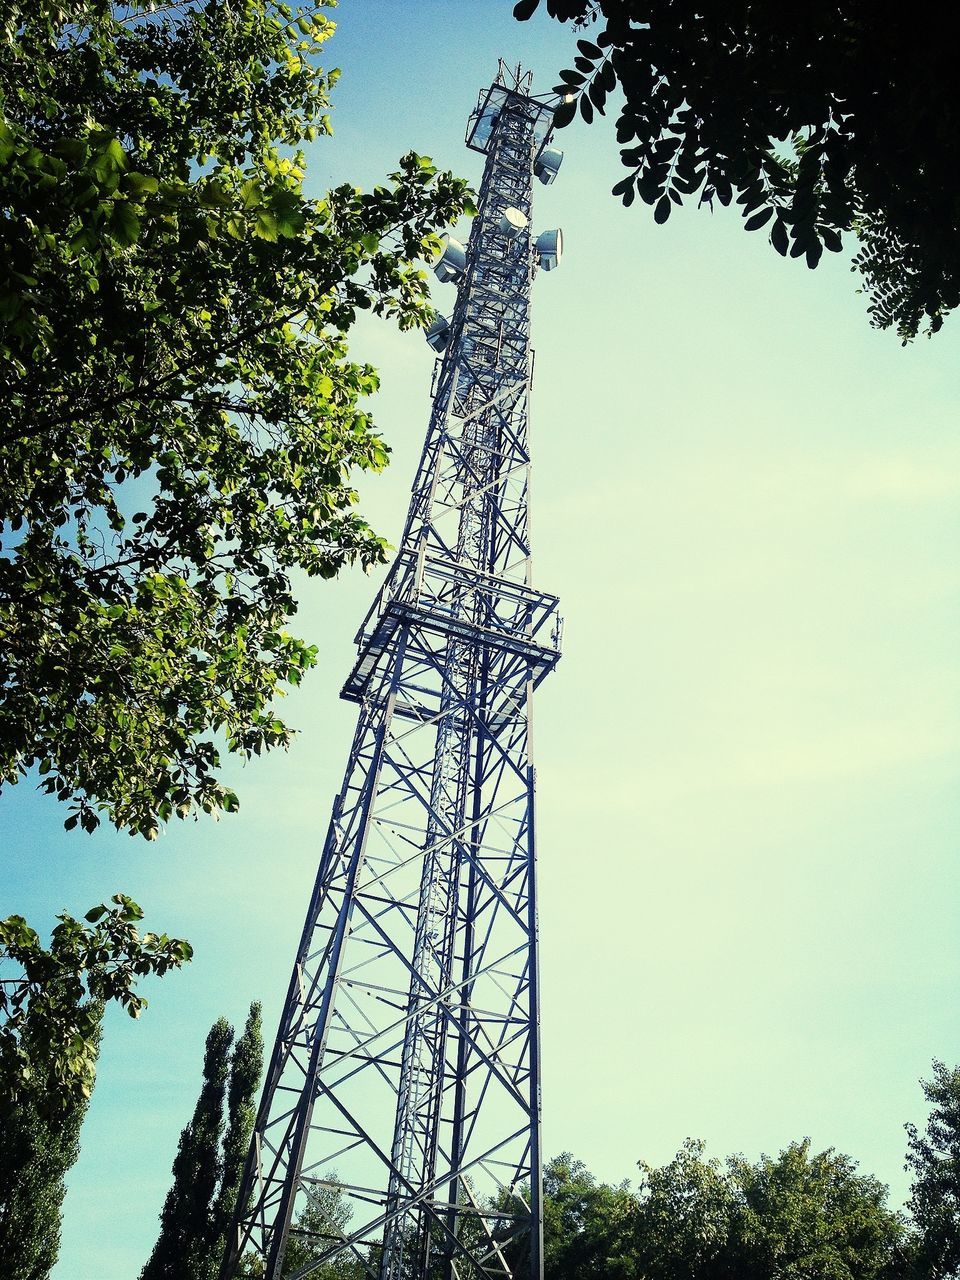 low angle view, tree, tall - high, tower, sky, built structure, branch, clear sky, metal, silhouette, communications tower, bare tree, architecture, technology, eiffel tower, outdoors, fuel and power generation, day, no people, tall